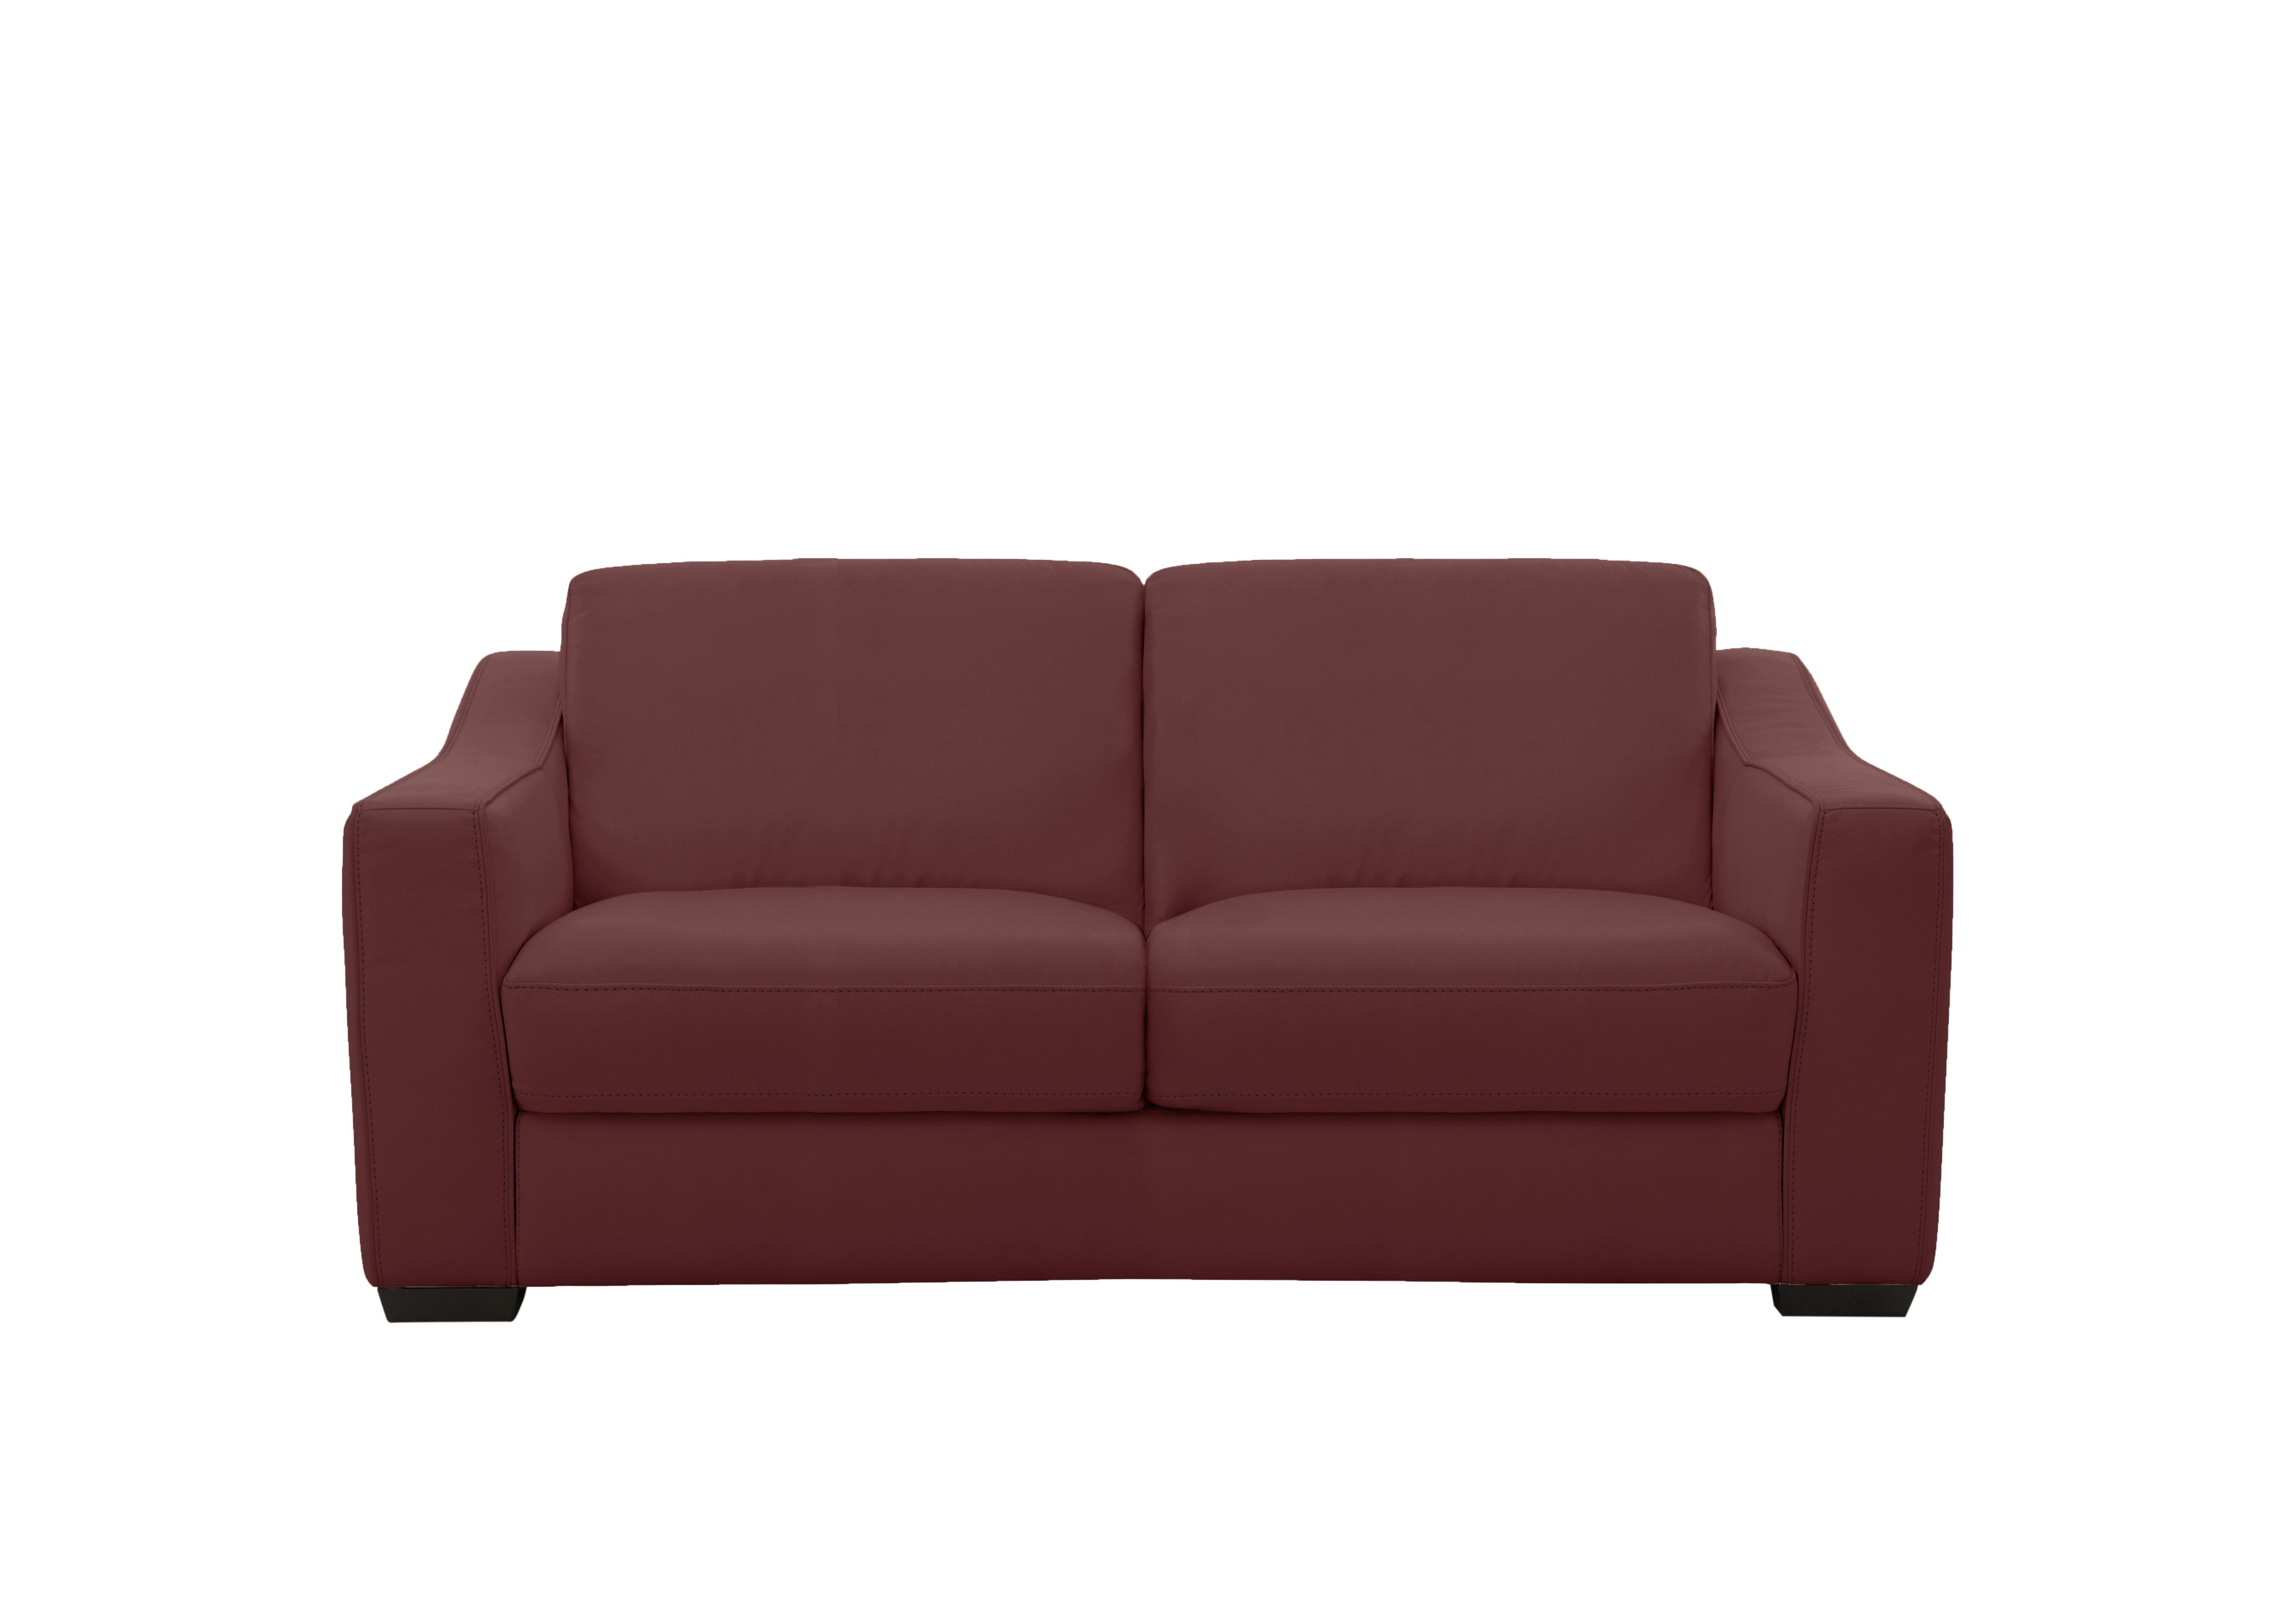 Optimus 2 Seater Leather Sofa in Bv-035c Deep Red on Furniture Village